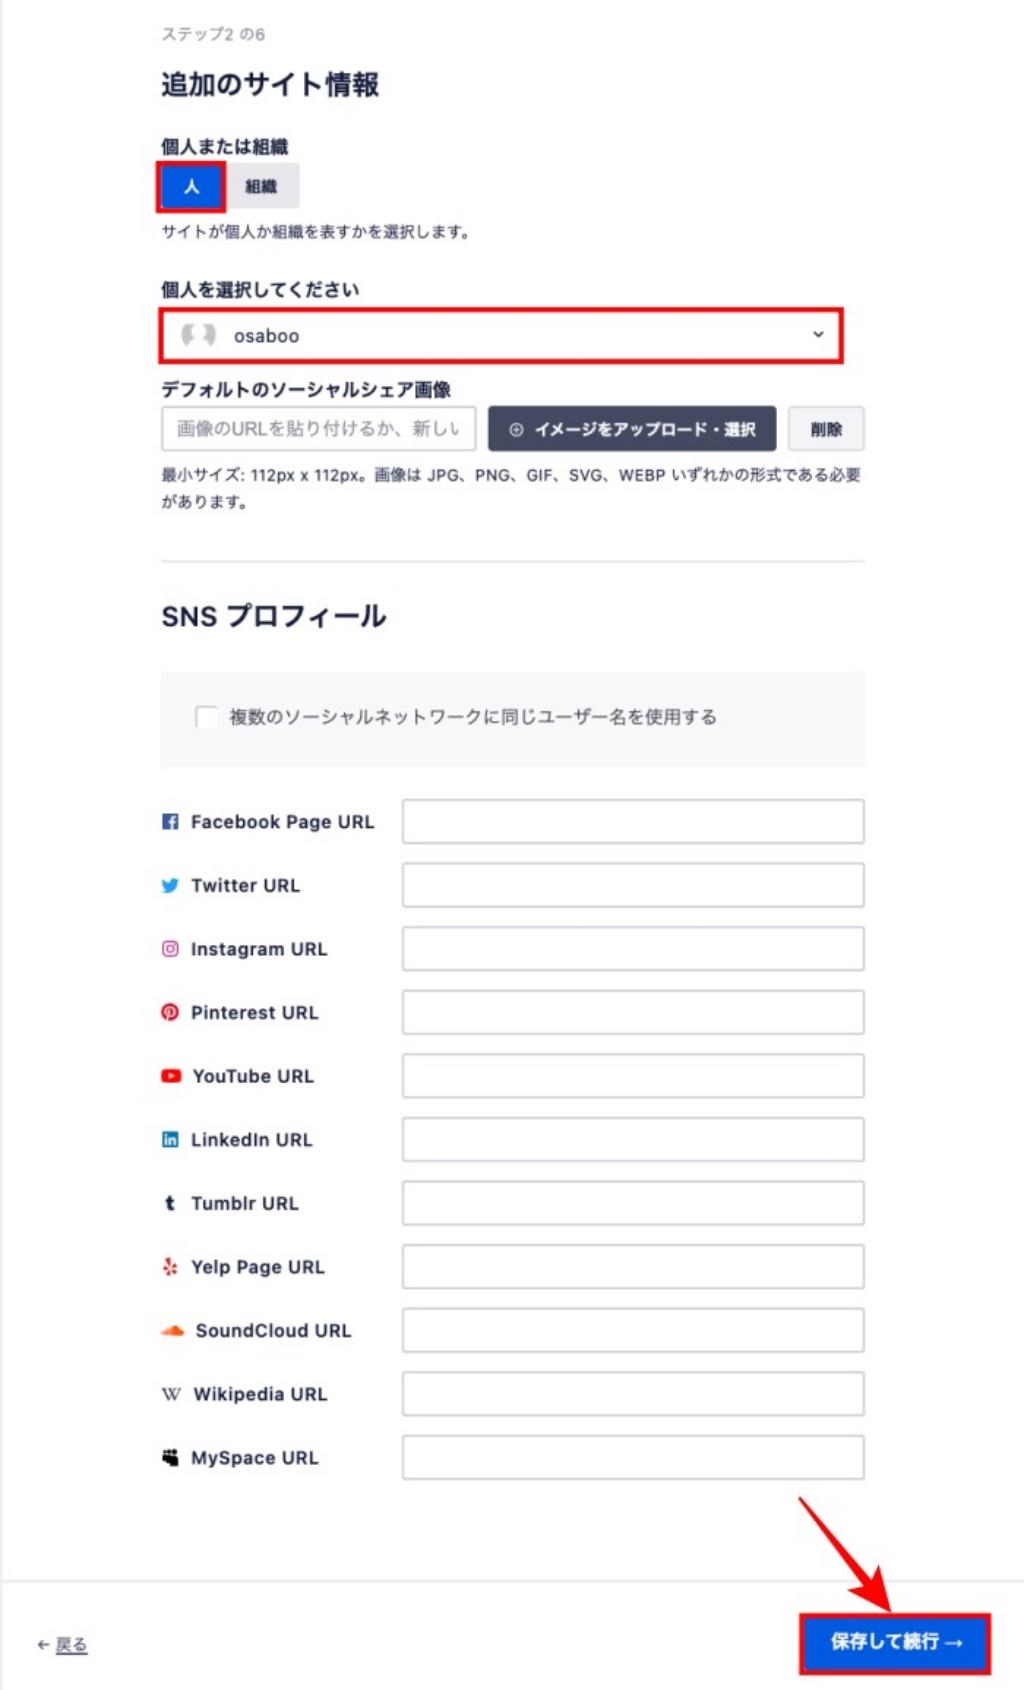 AIOSEO-追加のサイト情報